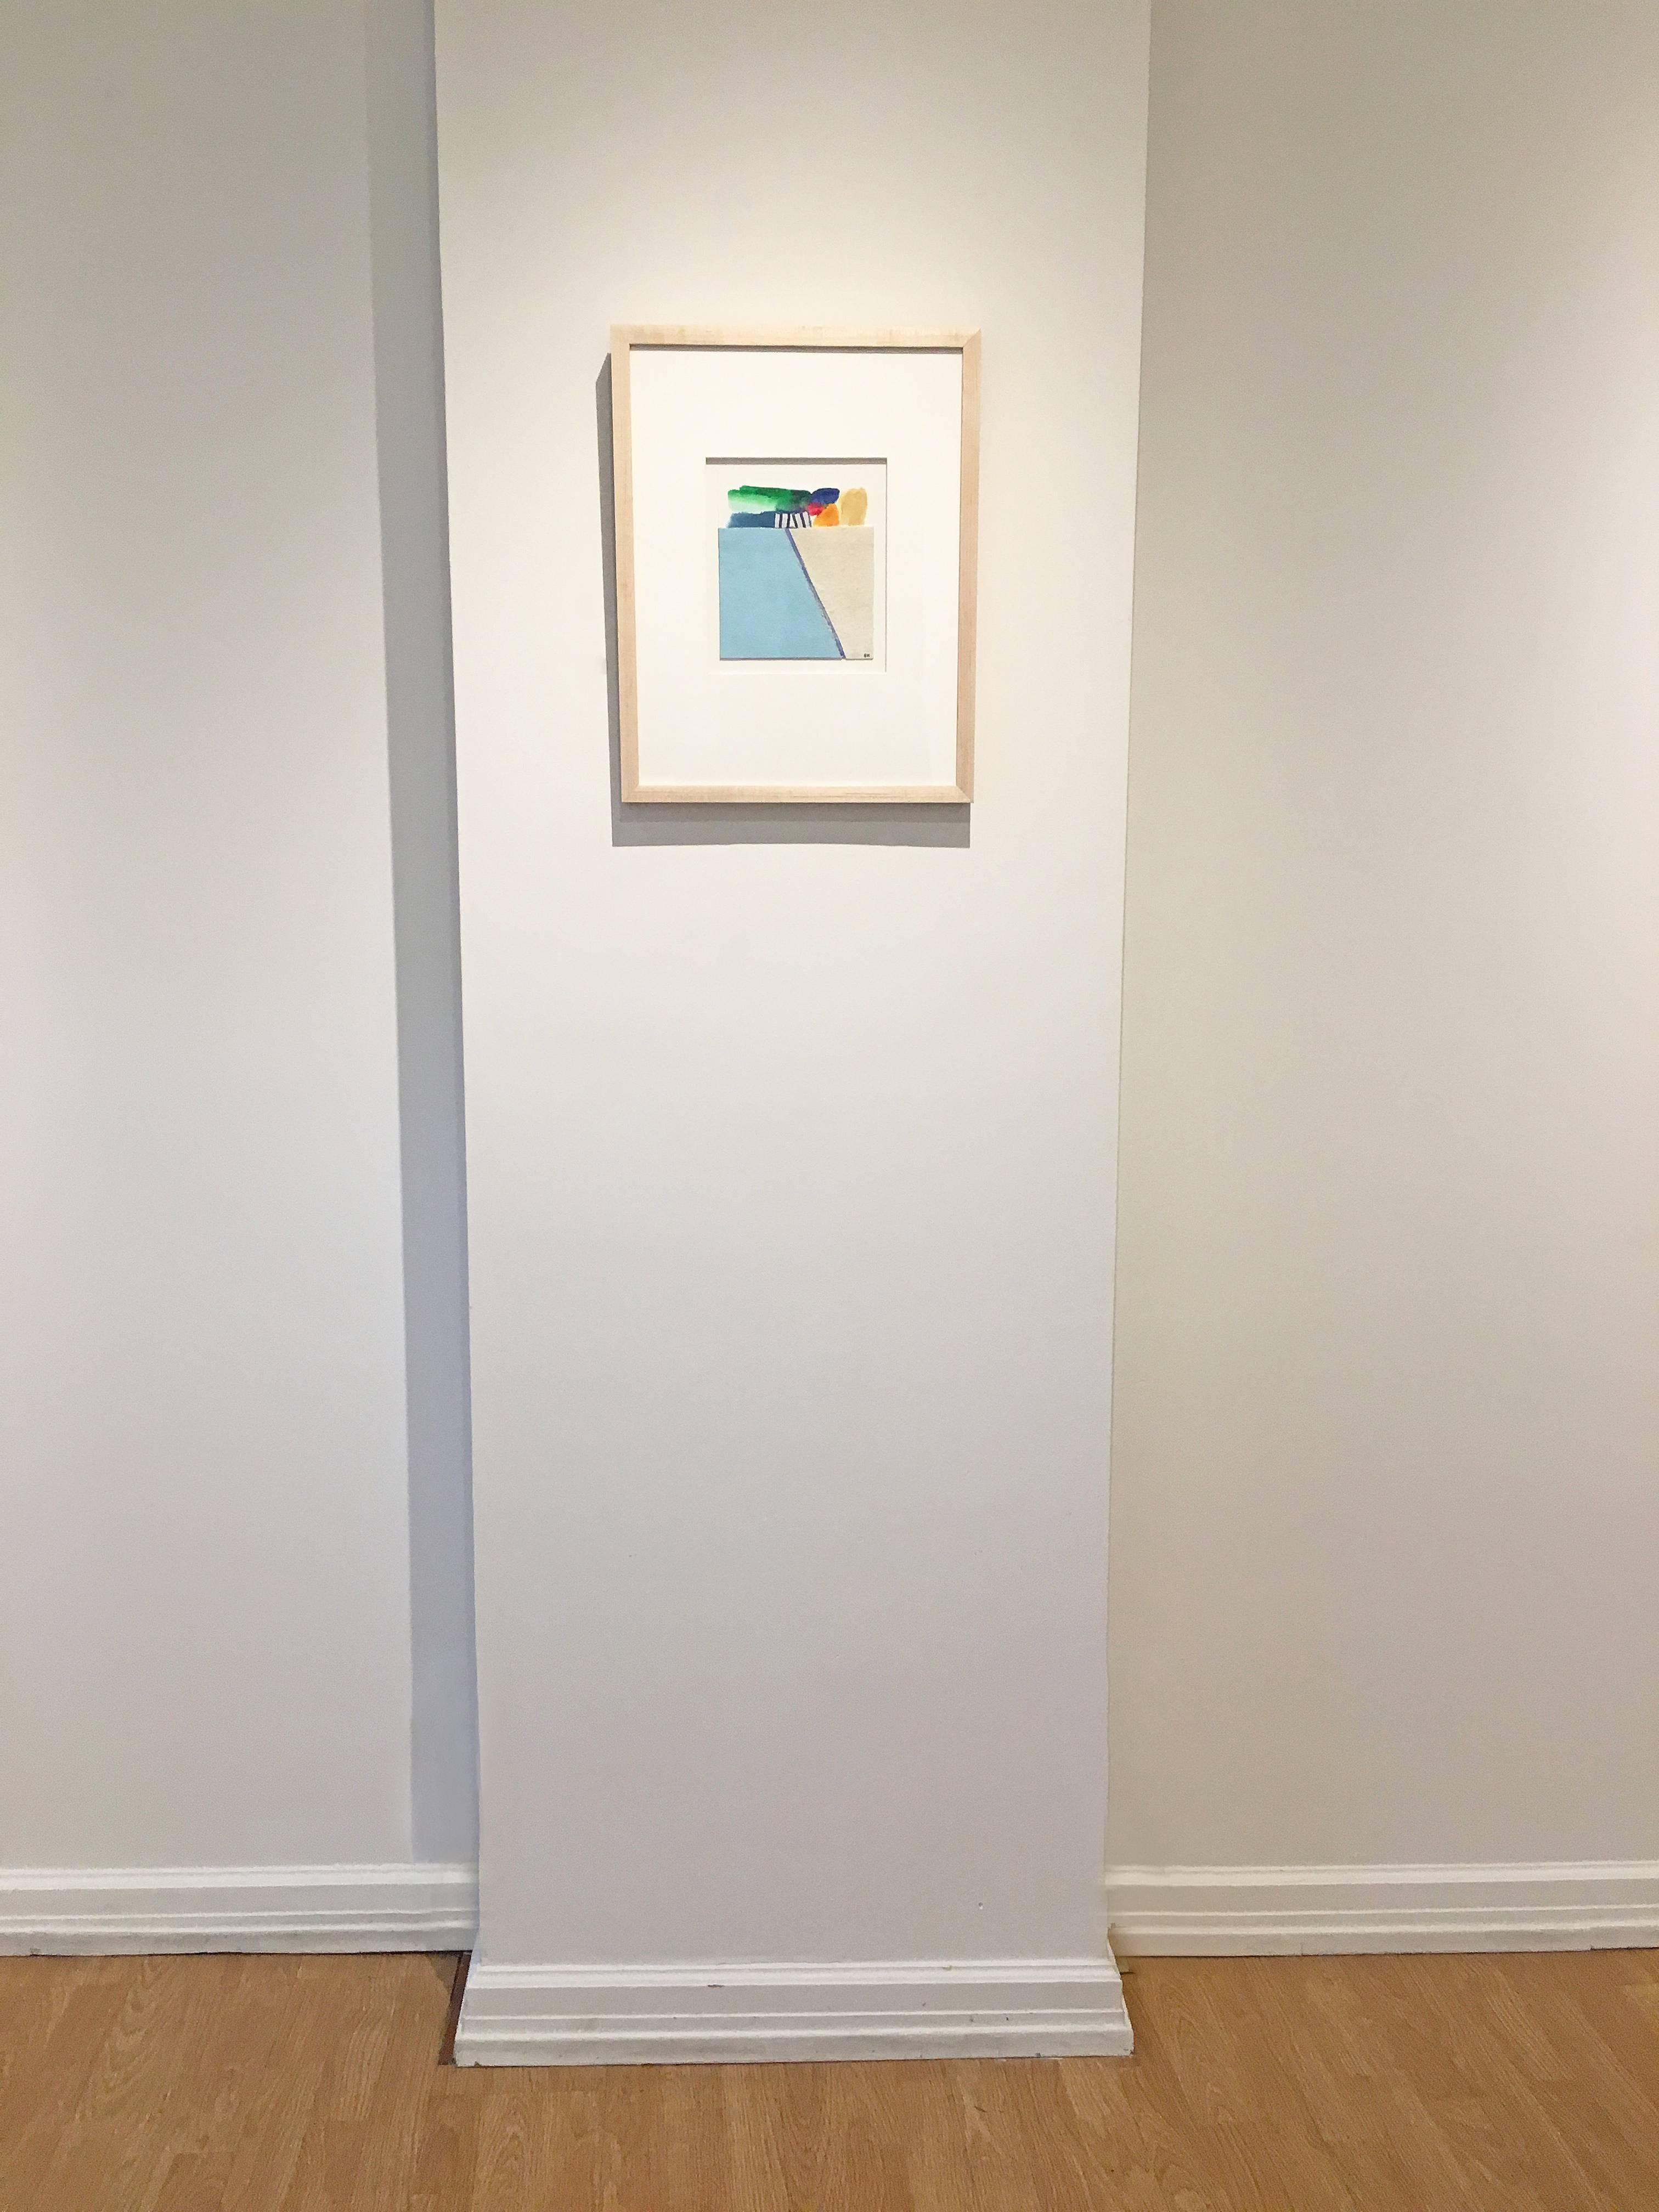 'Coastal Series 2' by Eugene Healy, 2017. Fabric collage and oil on canvas, Image: 7 x 6.25 in. / Frame: 19 x 15 in. This landscape painting features an abstracted coastal scene with land and sea in aerial view.  In calming colors of light blue,